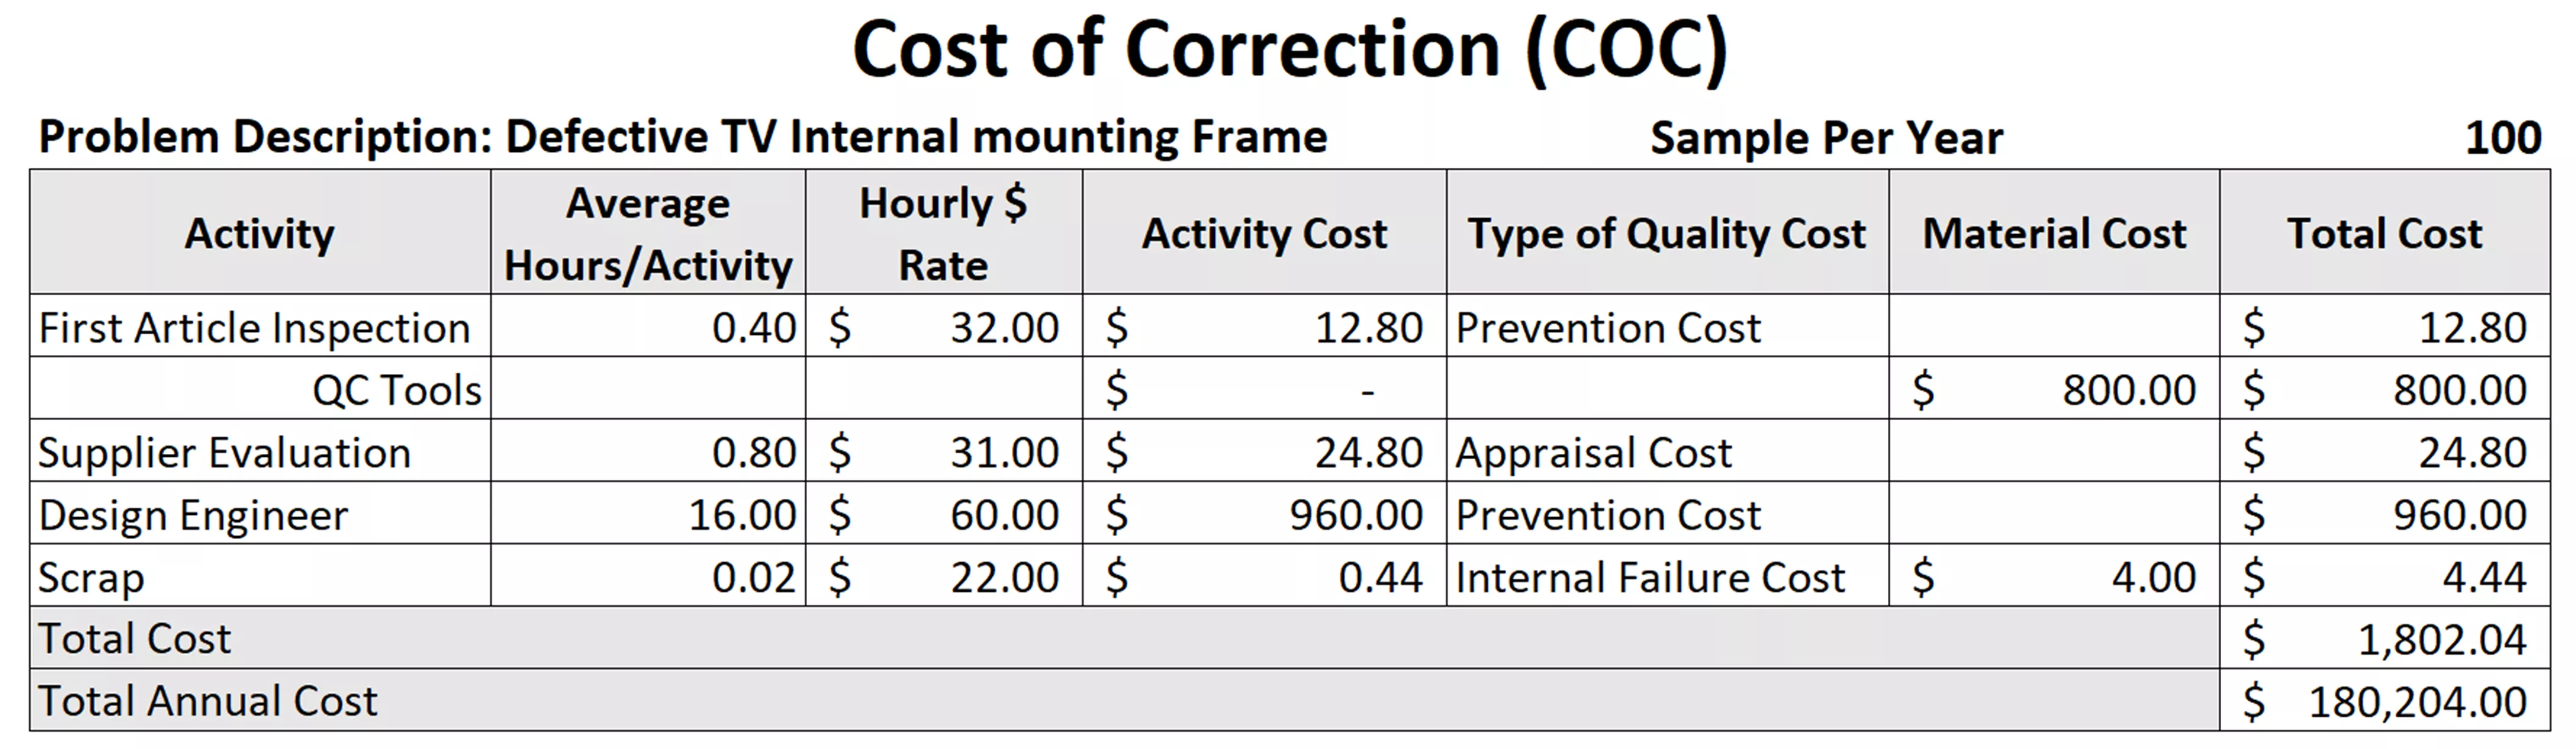 Quality Control Cost of Correction Chart 